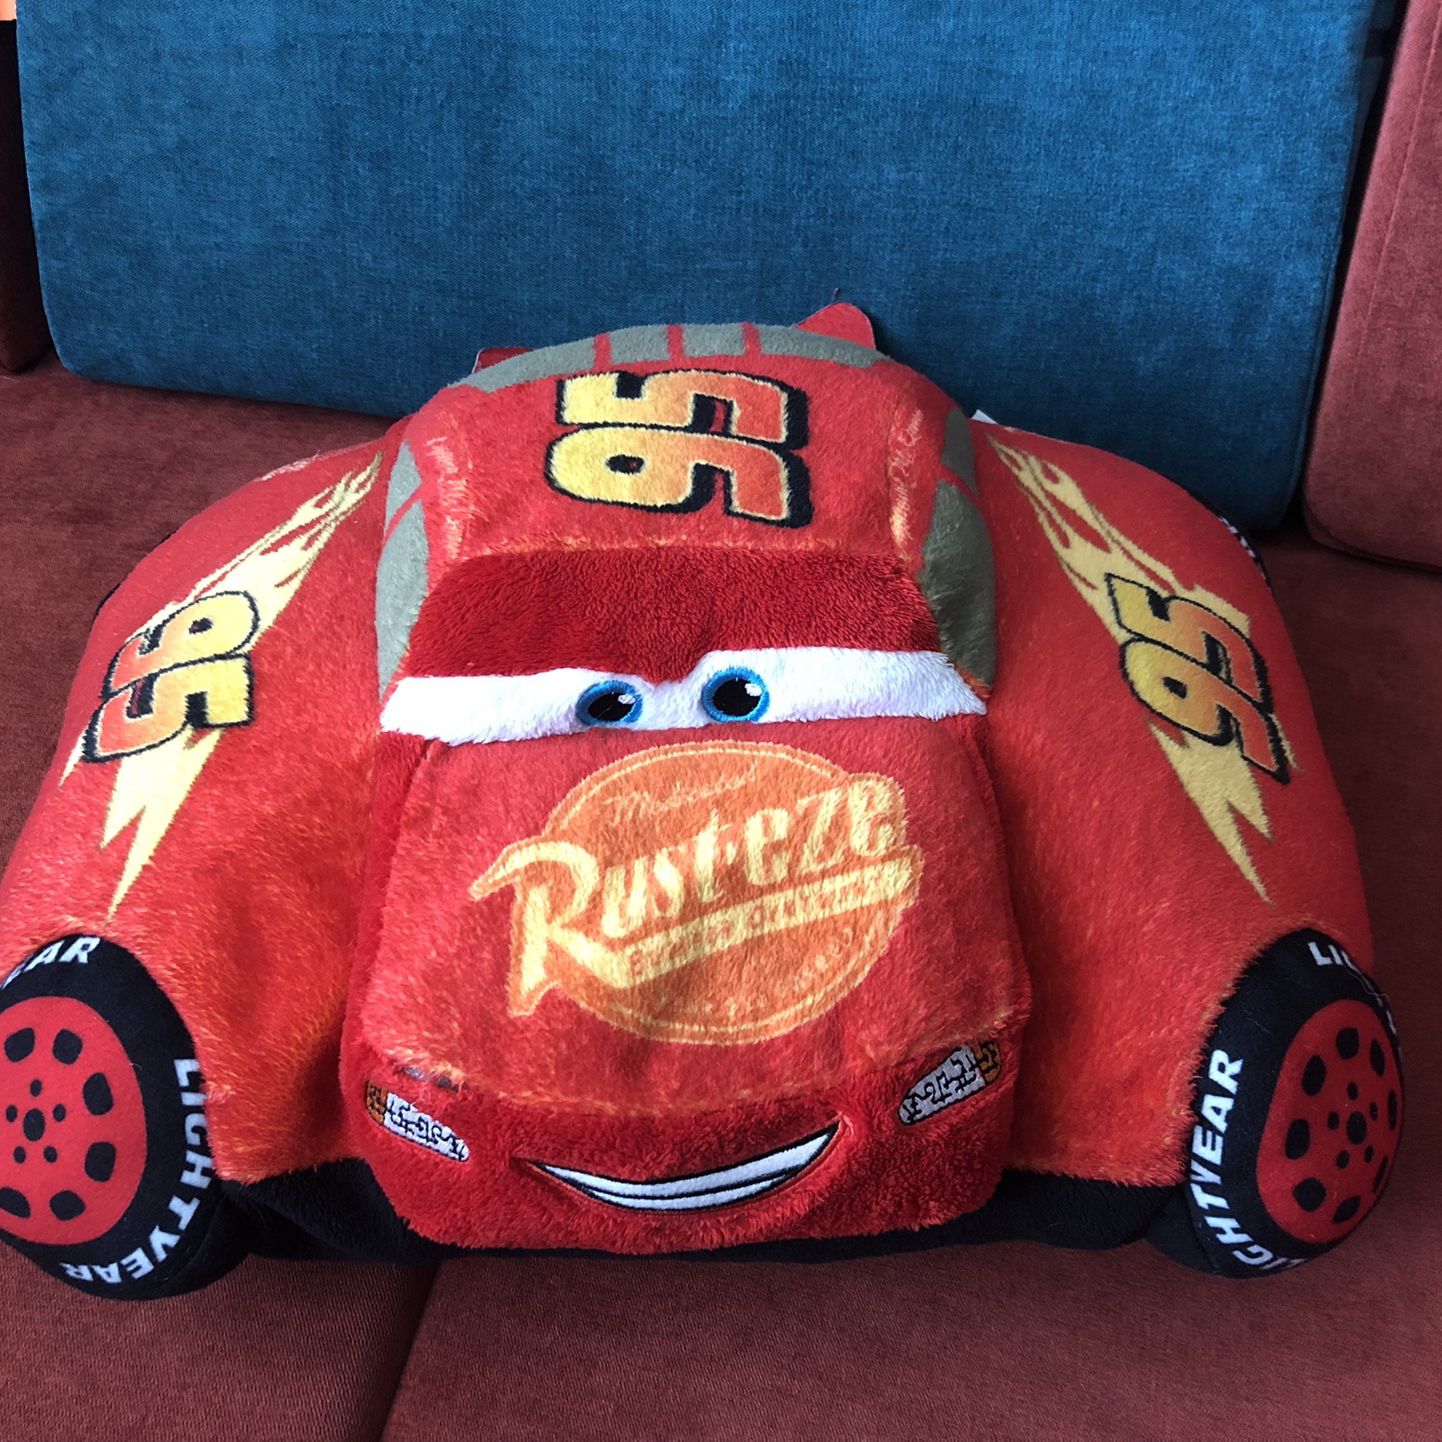 Cars Movie Lightning McQueen Pillow Pet Squishy Toy for Sale in Renton, WA  - OfferUp